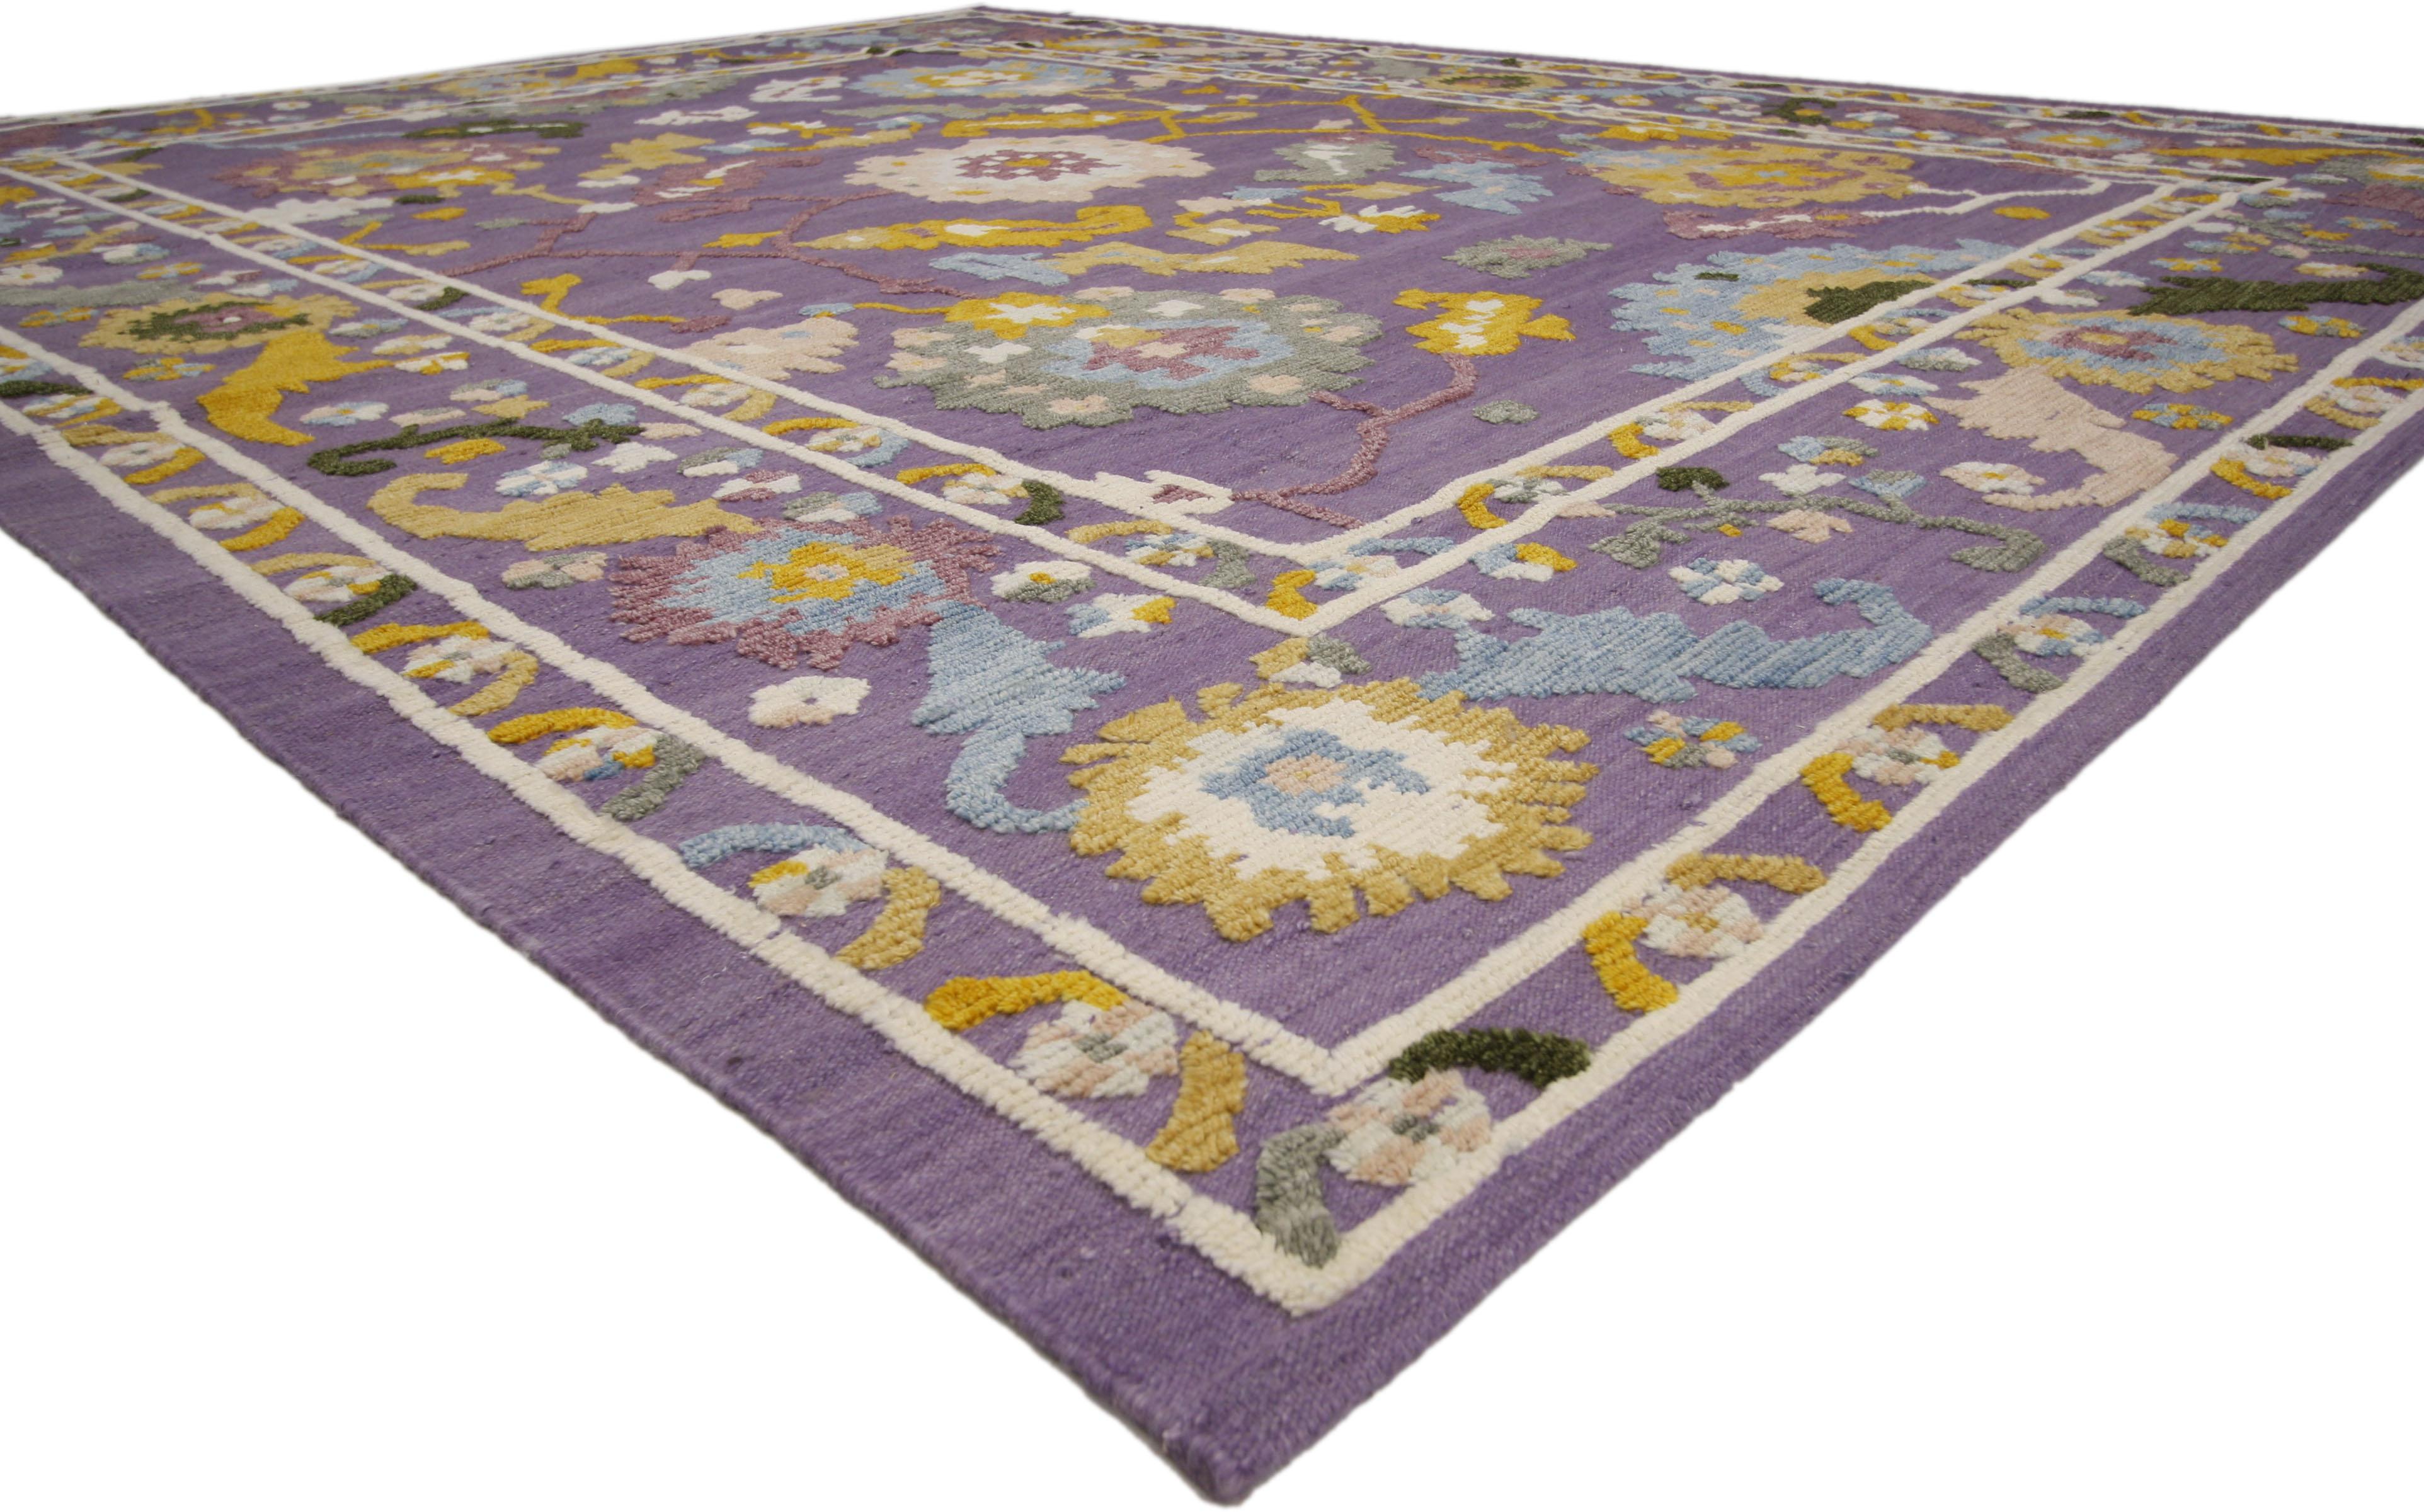 Indian Large-Scale Geometric Print Rug, Purple Oushak Rug, High and Low Texture Rug